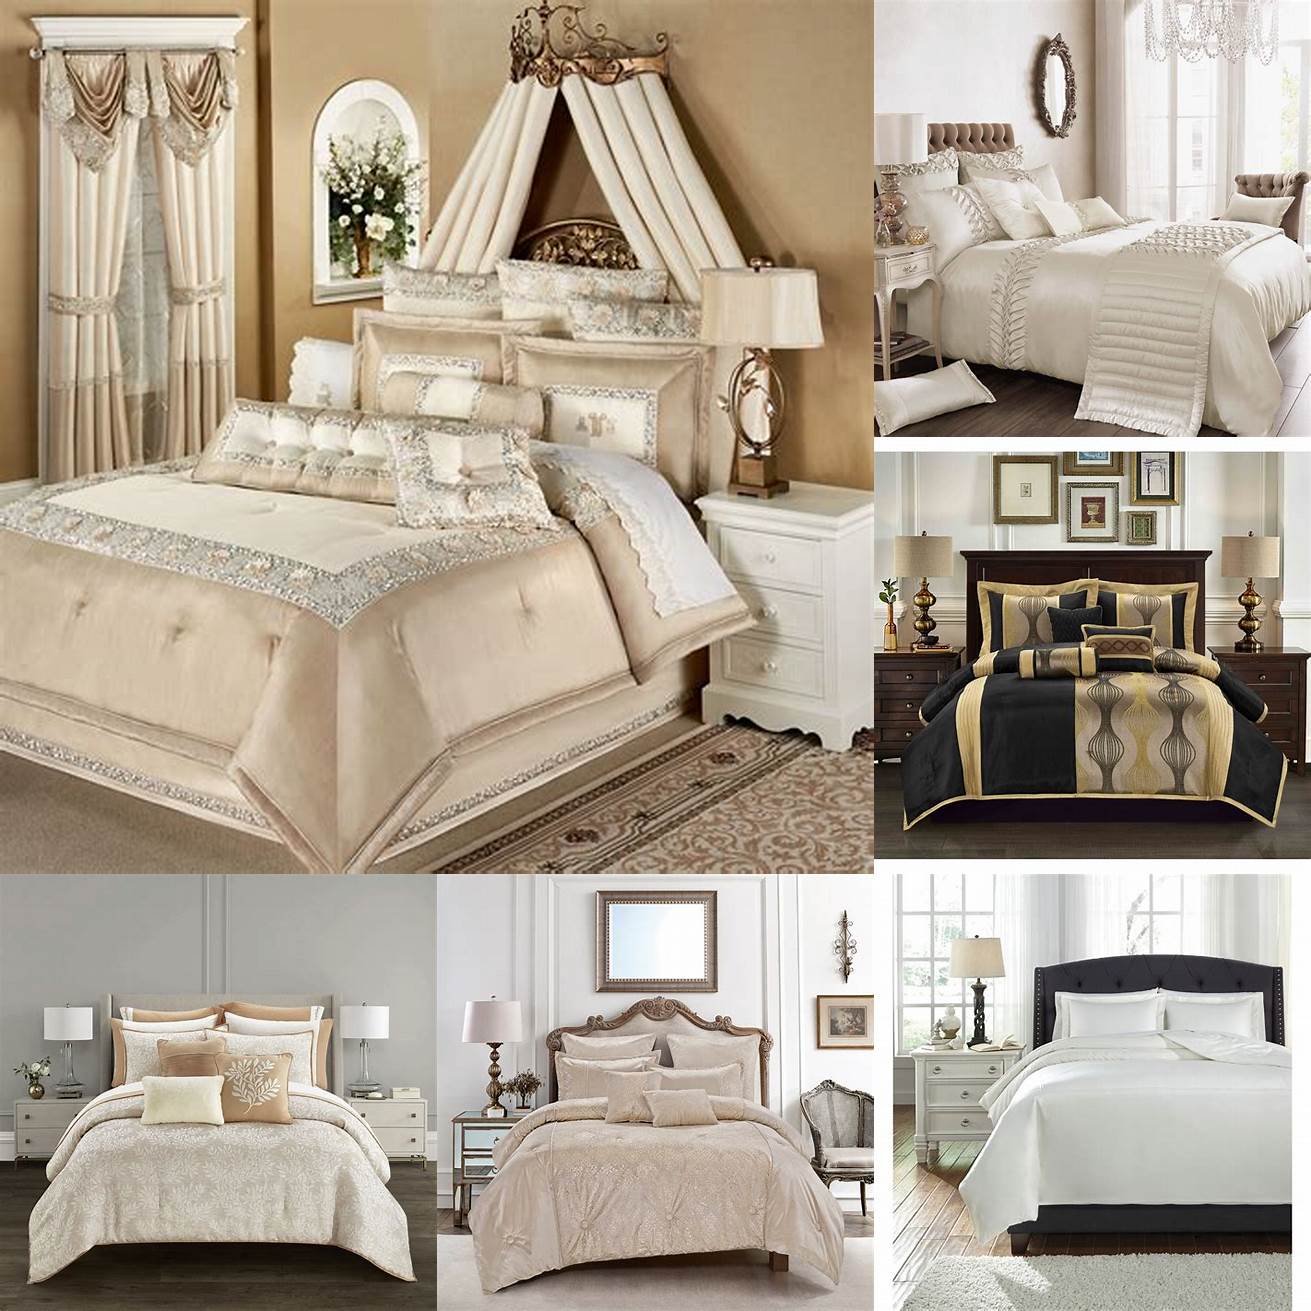 Invest in quality bedding A luxury bedroom set is only as good as the bedding that goes with it Invest in high-quality sheets pillows and a comforter to ensure that you get the most out of your investment